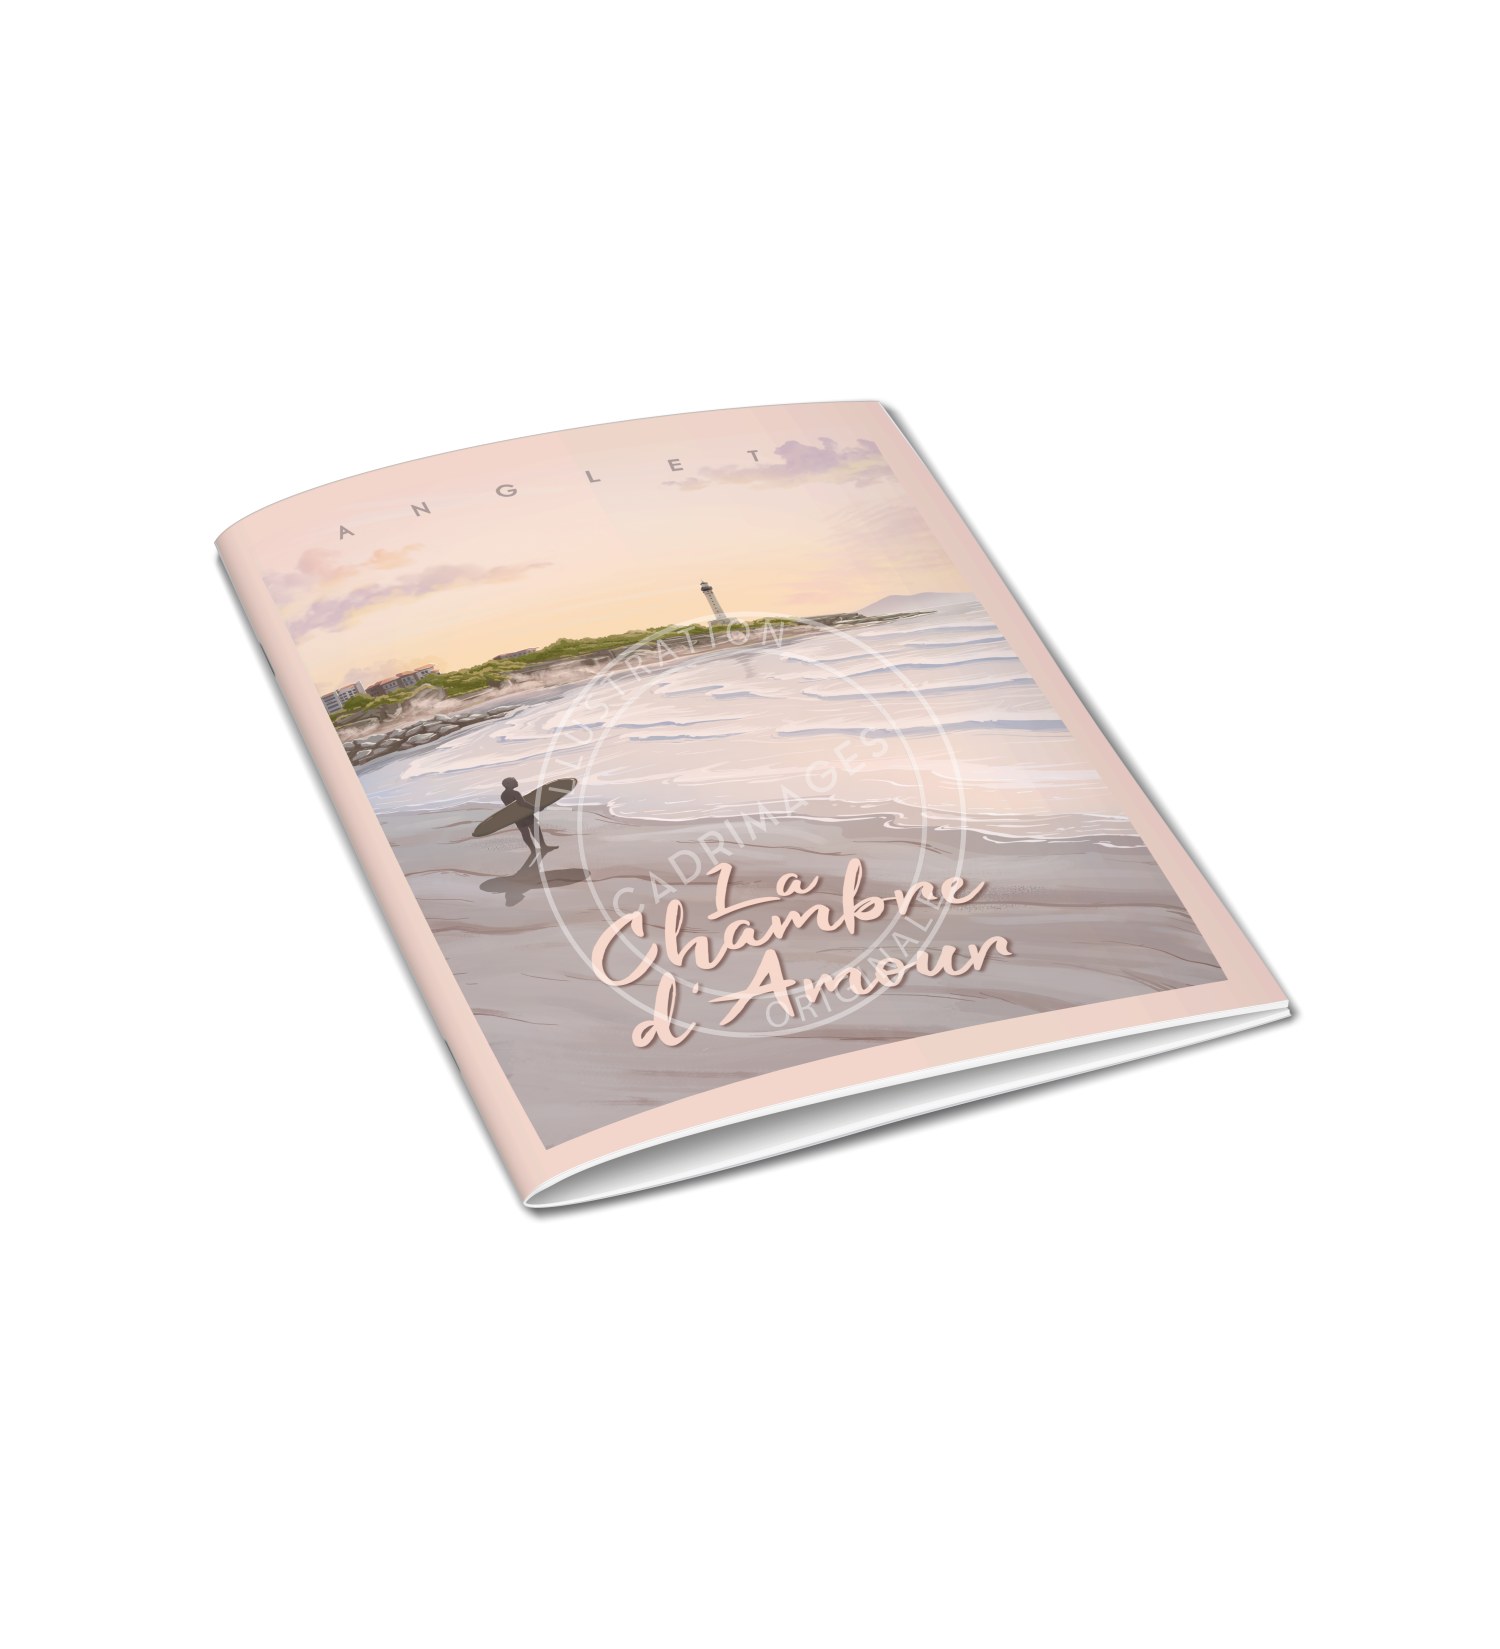 Notebook Anglet chambre d'amour